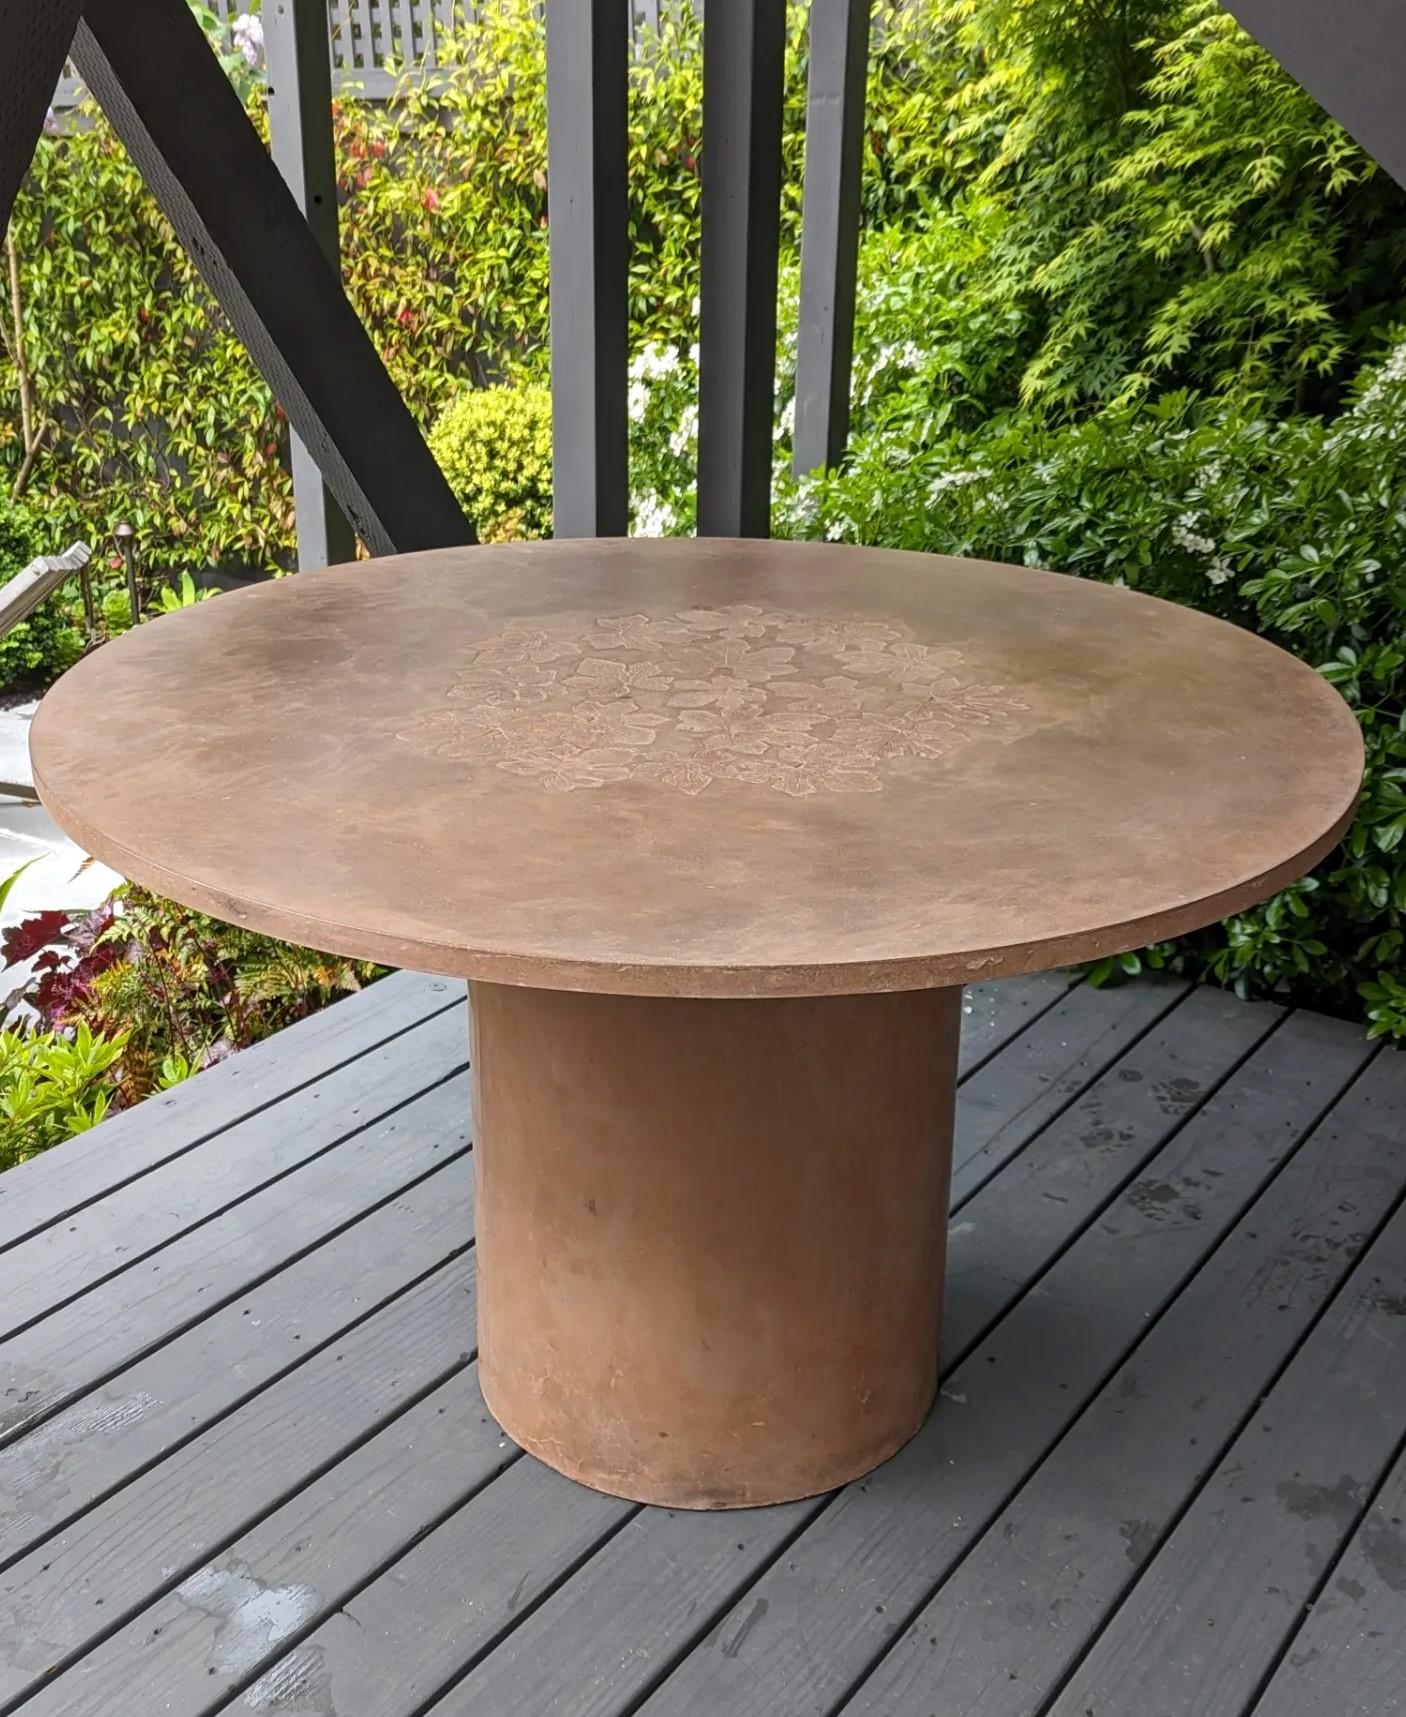 Highly customizable mid-weight round concrete dining or coffee table tops on pillar bases, with or without impressions from real leaves, can make a natural addition to nearly any room or outdoor environment. Tops are secured to bases with velcro.